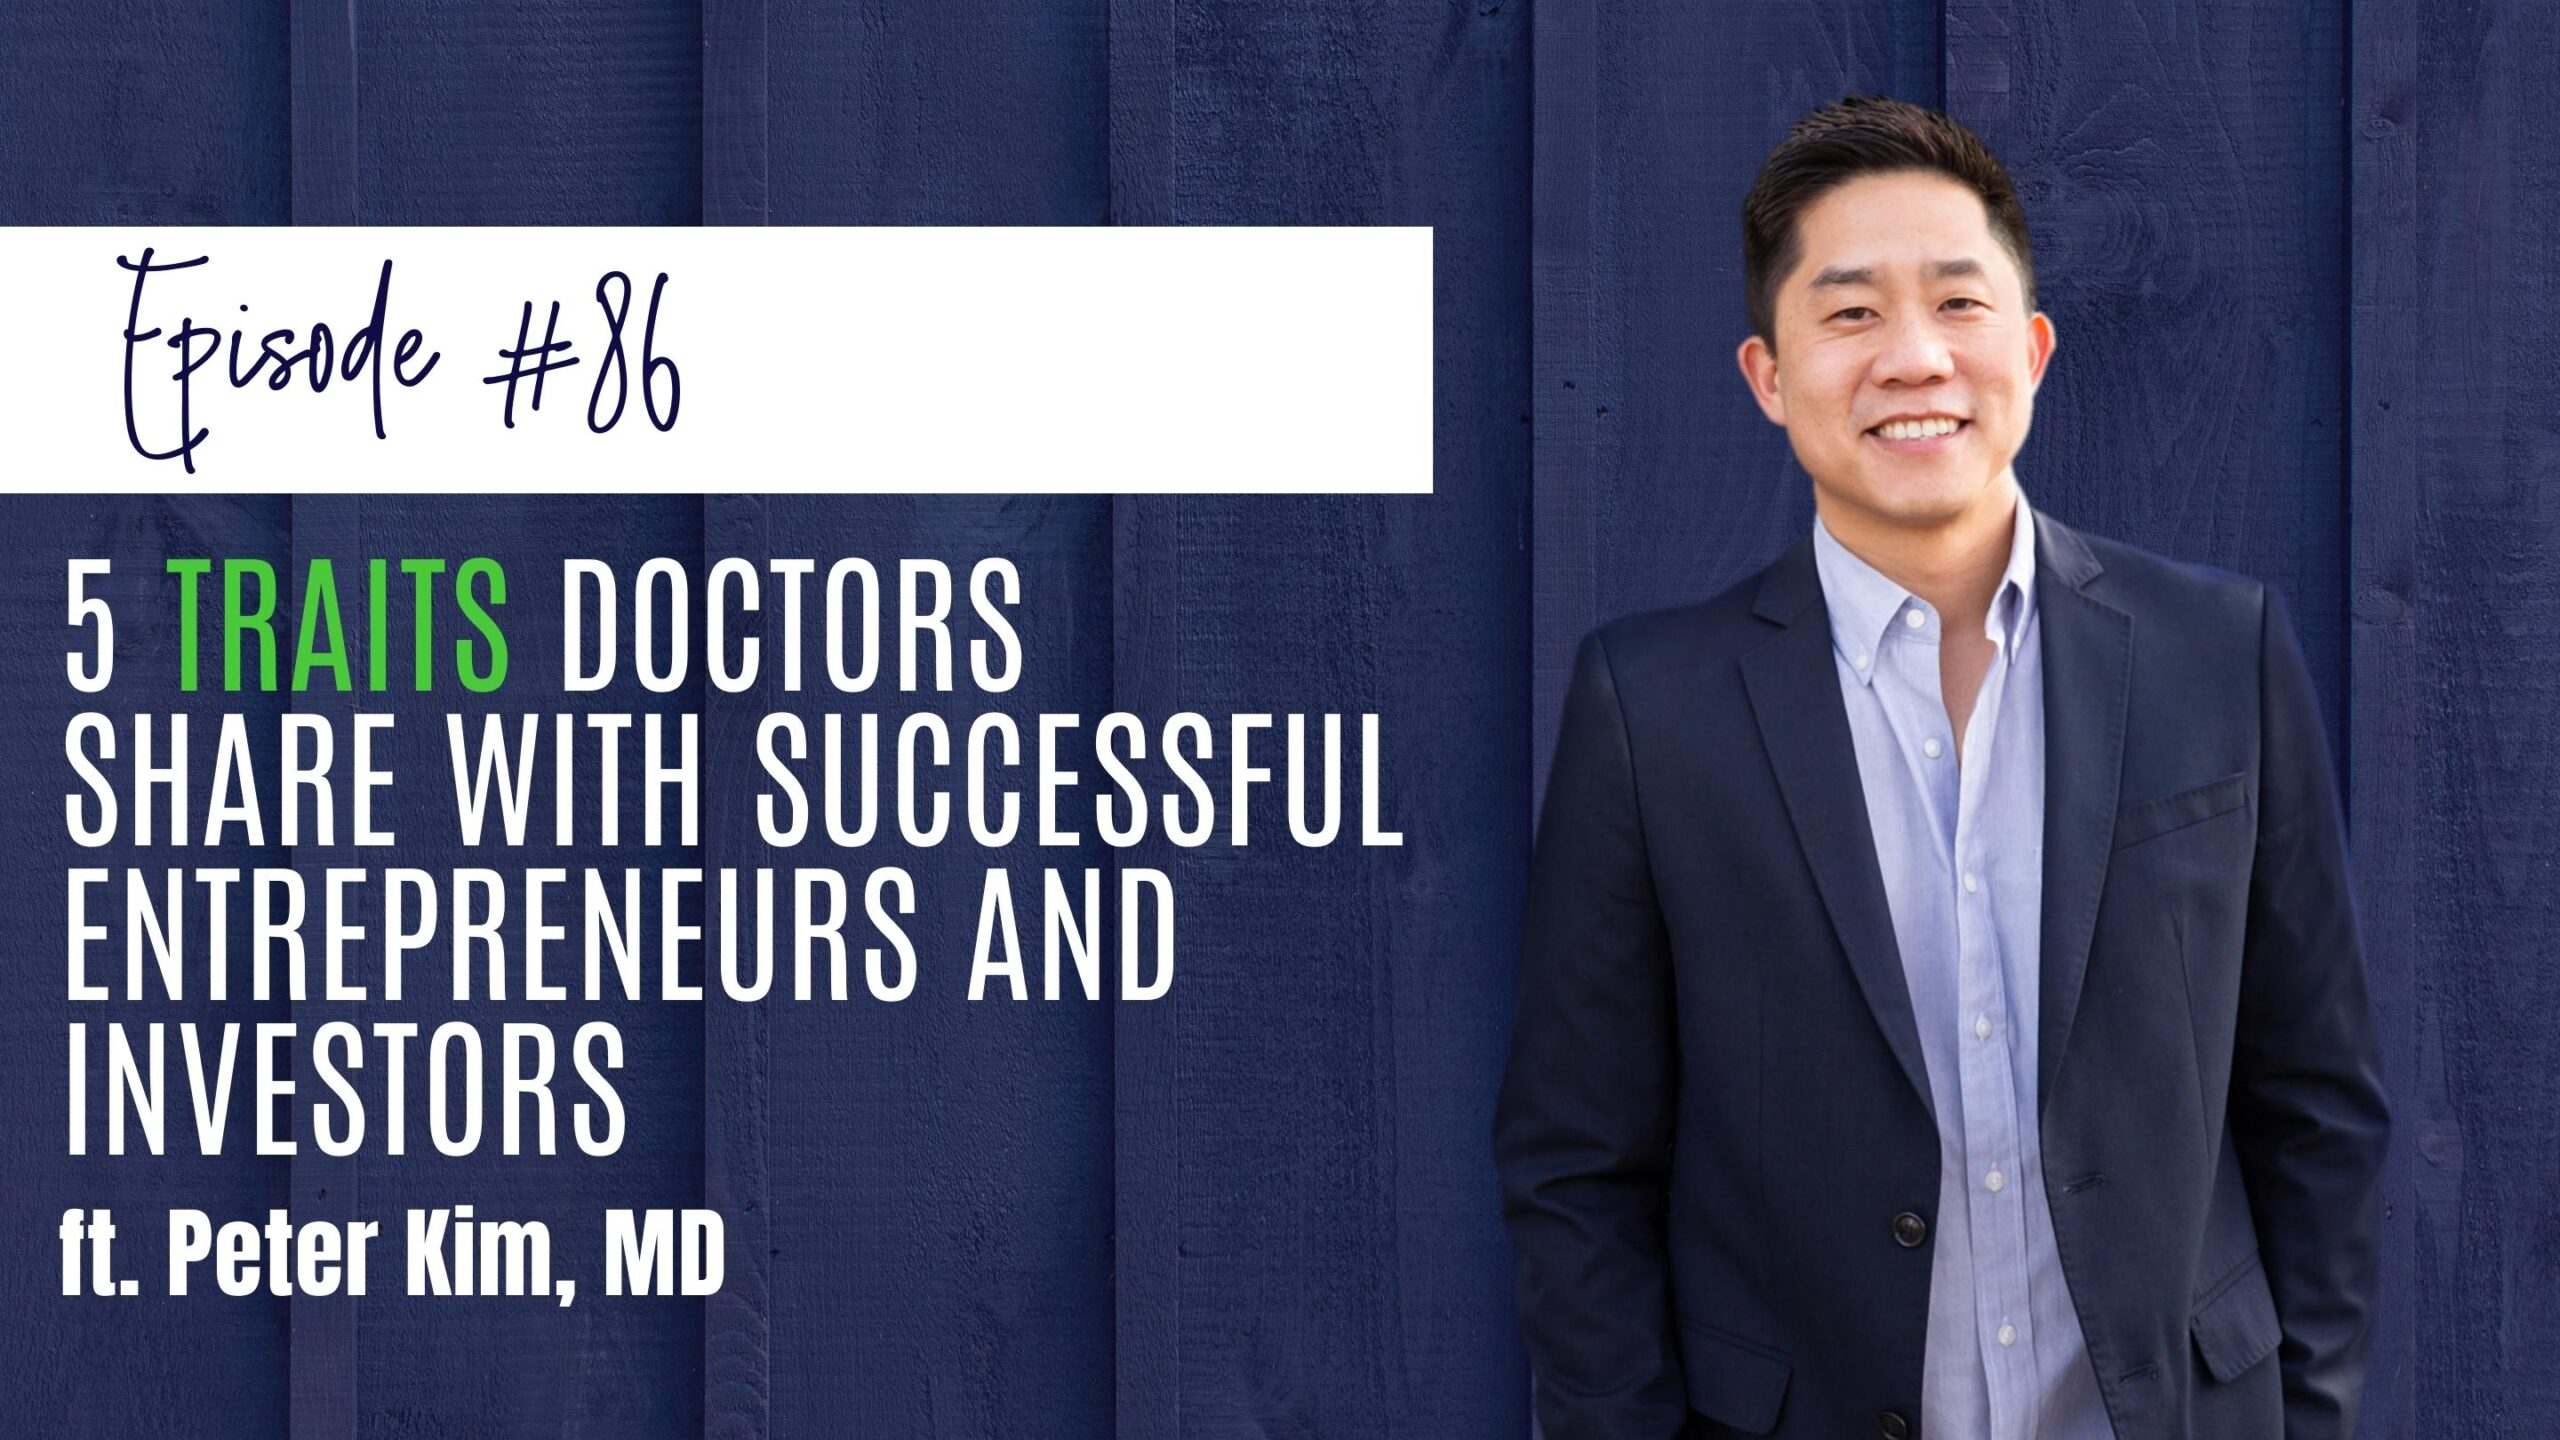 5-Traits-Doctors-Share-with-Successful-Entrepreneurs-and-Investors-scaled-1.jpg